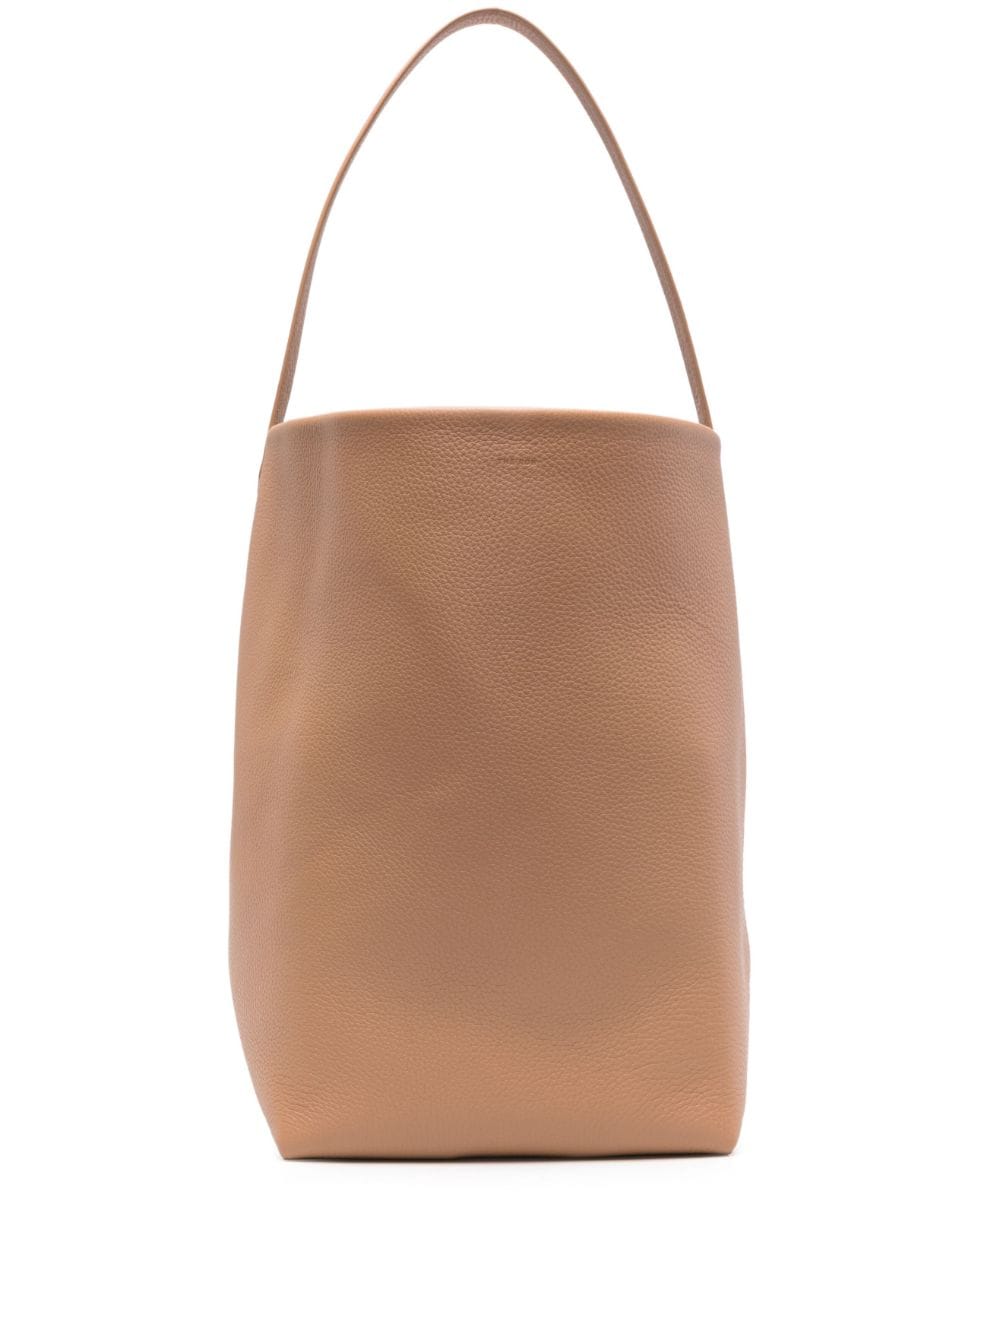 N/W Park leather tote bag